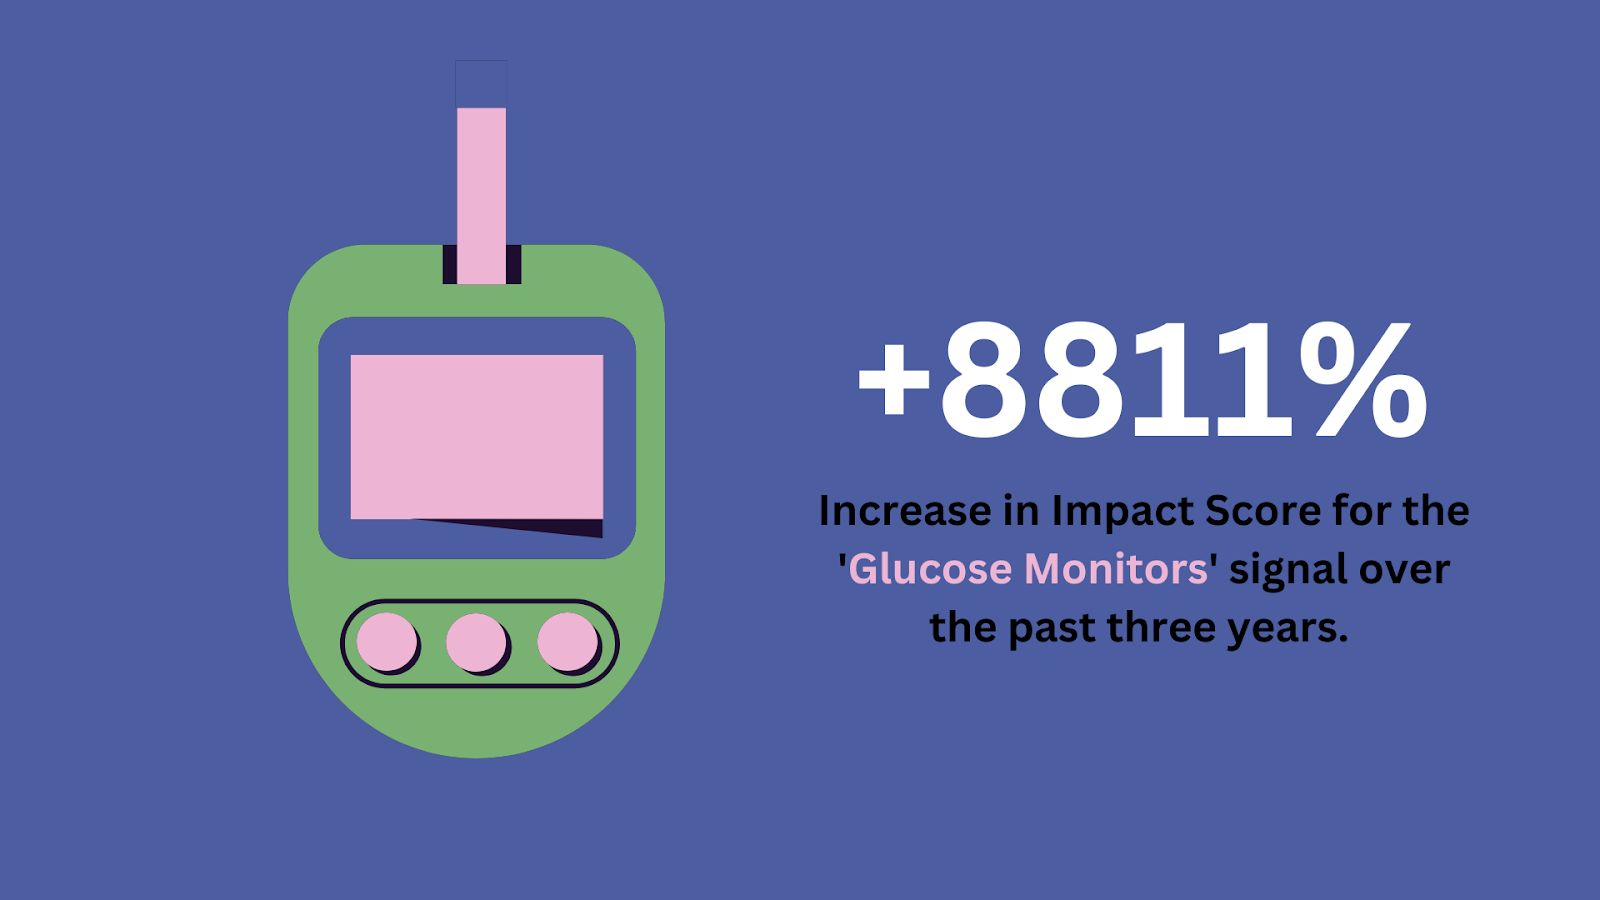 A New Era for Wearables: What the ‘Glucose Monitors’ Trend Signals for Health Tech